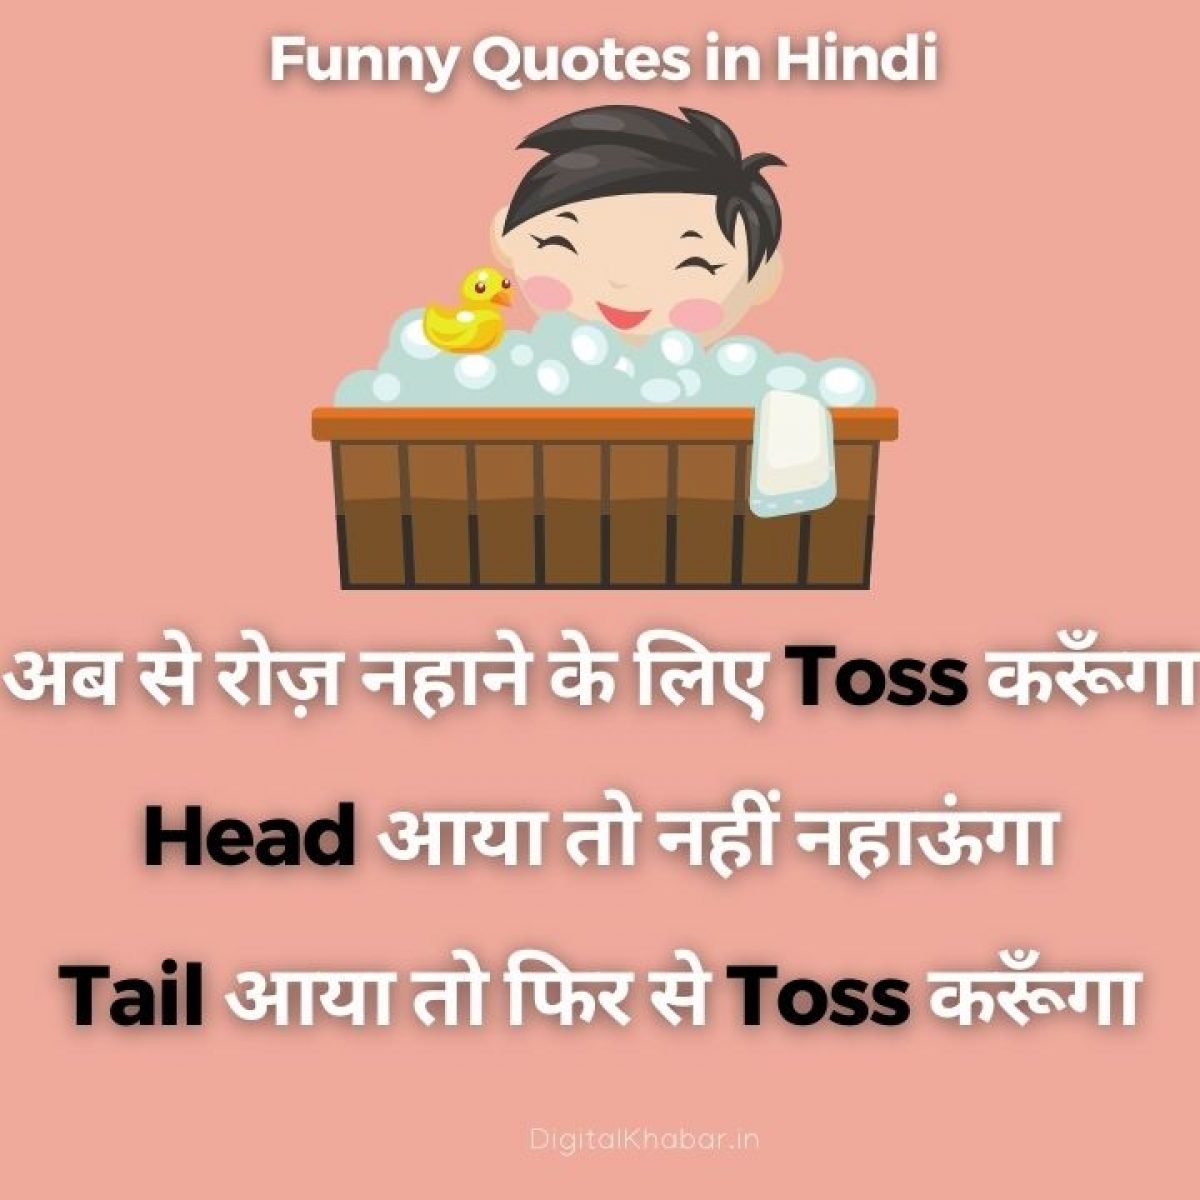 “Hilarious Hindi Quotes with Images: An Incredible Collection of 999+ Funny Quotes in 4K Resolution”